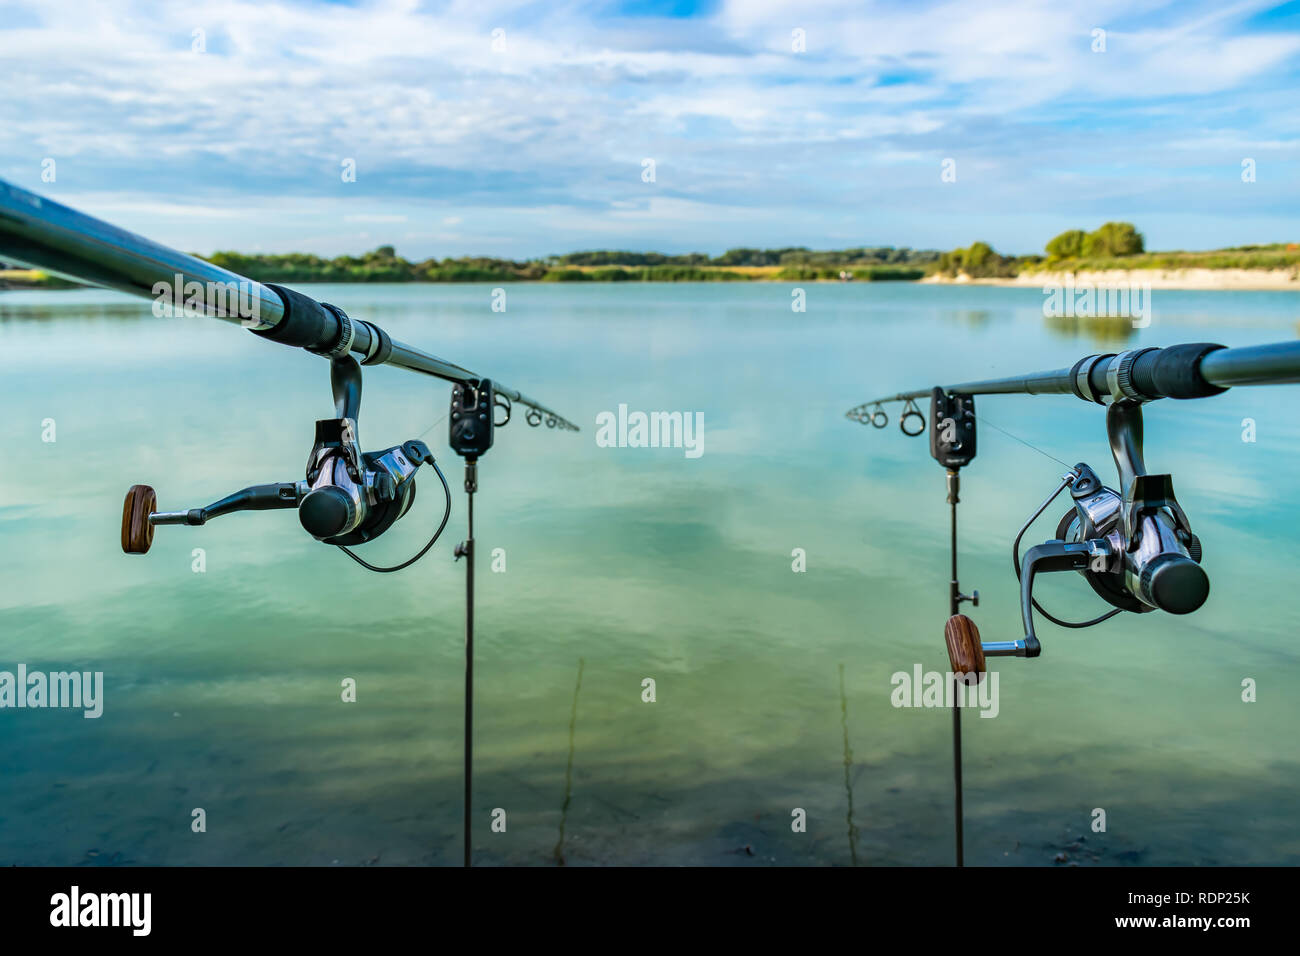 https://c8.alamy.com/comp/RDP25K/view-of-two-fishing-rods-on-stands-with-electronic-lights-on-the-background-of-a-beautiful-green-lake-RDP25K.jpg